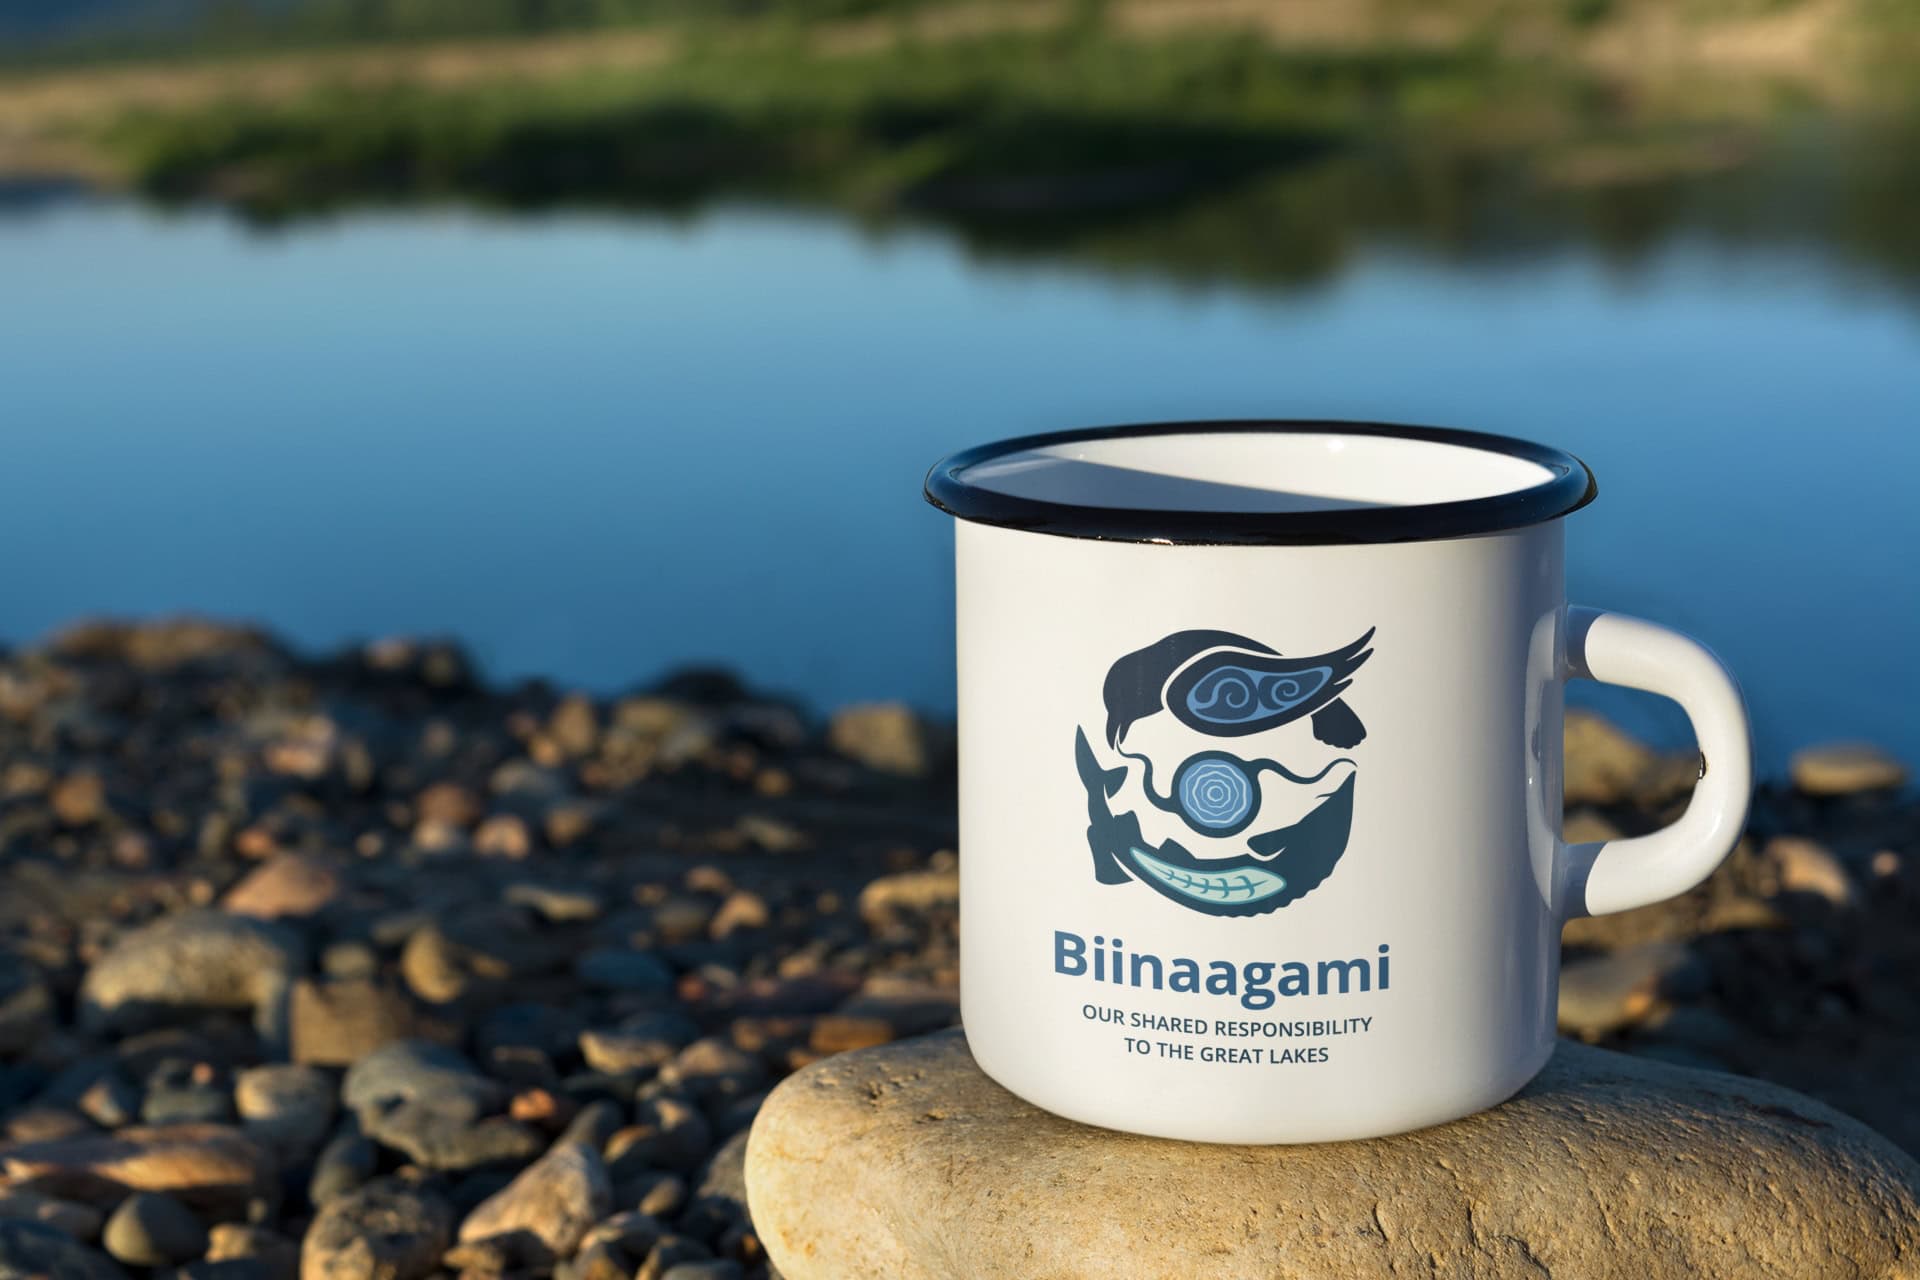 A cup with the Biinaagami logo sits next to the waters of the Great Lakes.